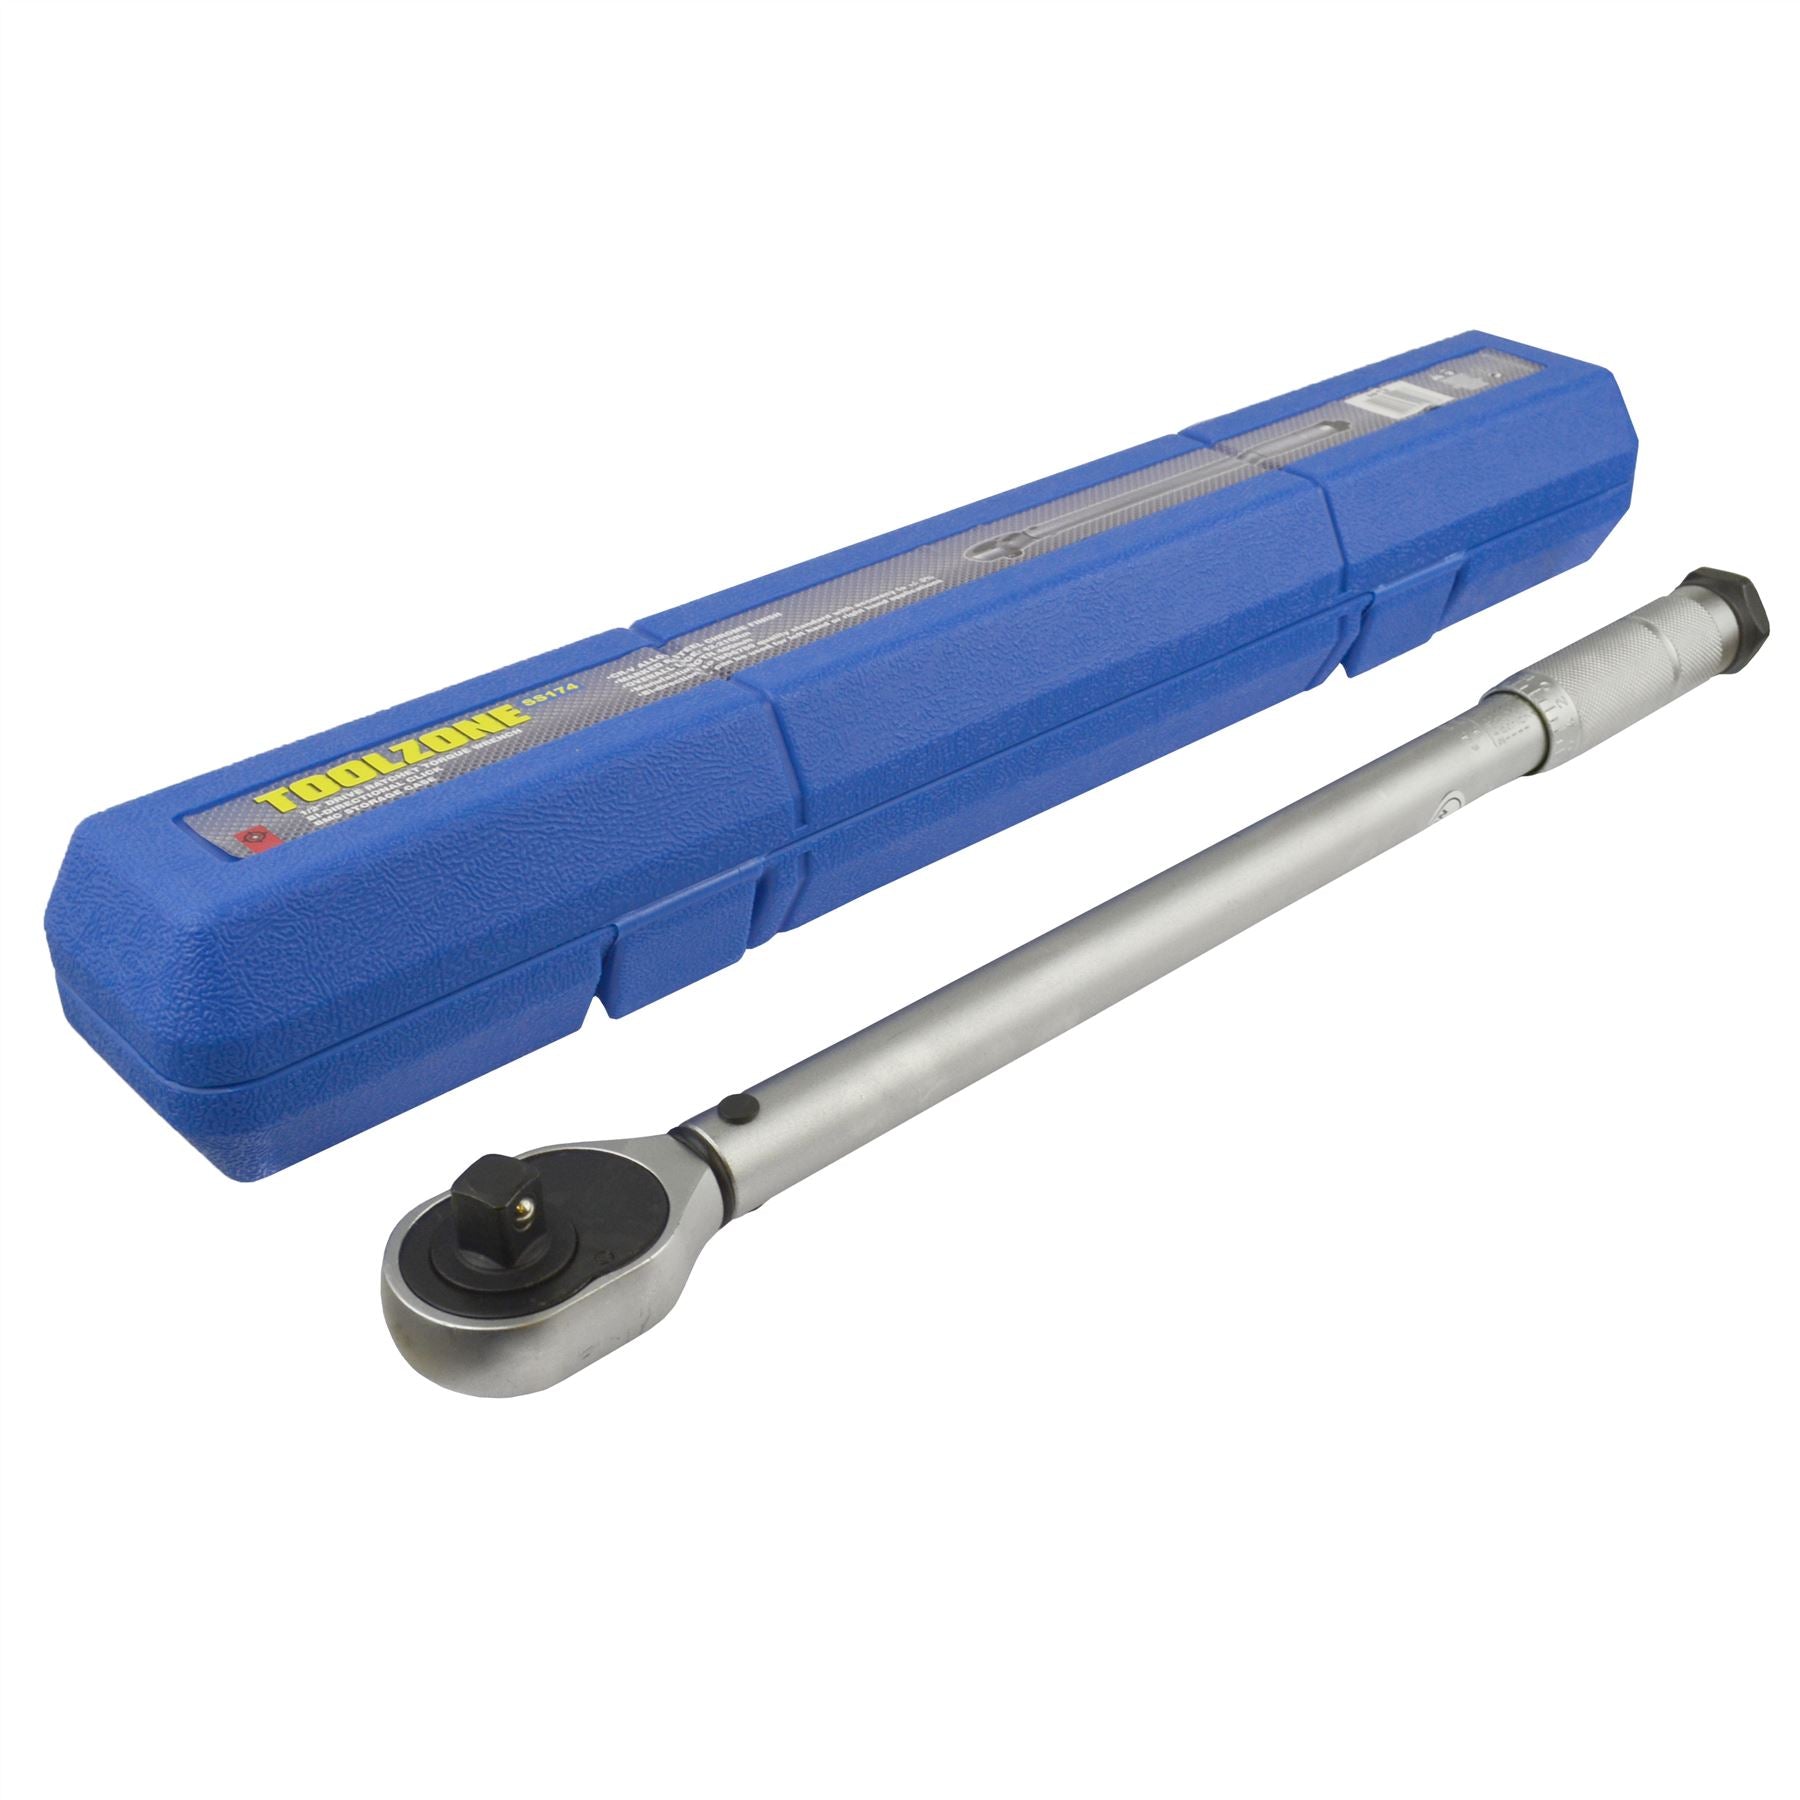 1/2"dr Ratchet Torque Wrench 42Nm to 210Nm TE024